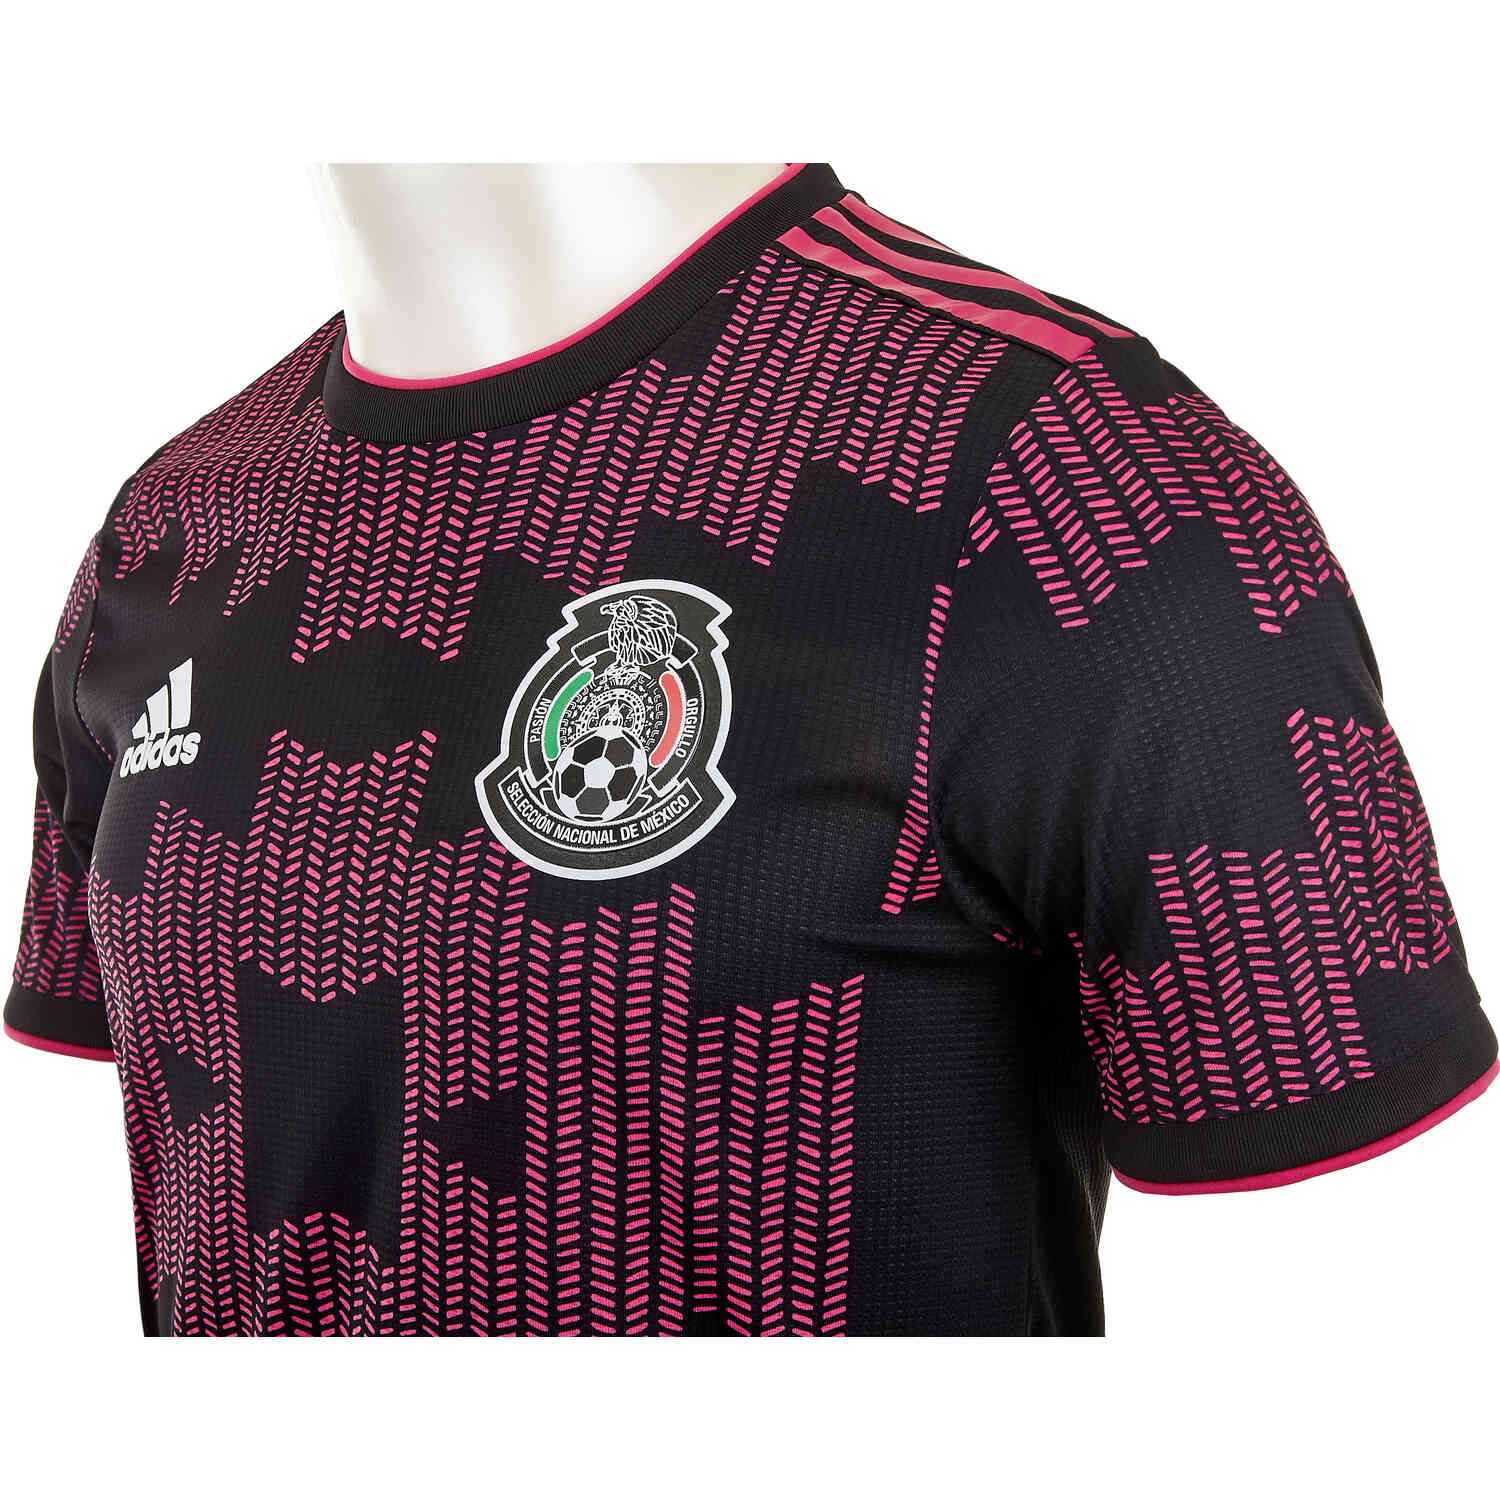 2021 adidas Mexico Home Authentic Jersey - SoccerPro